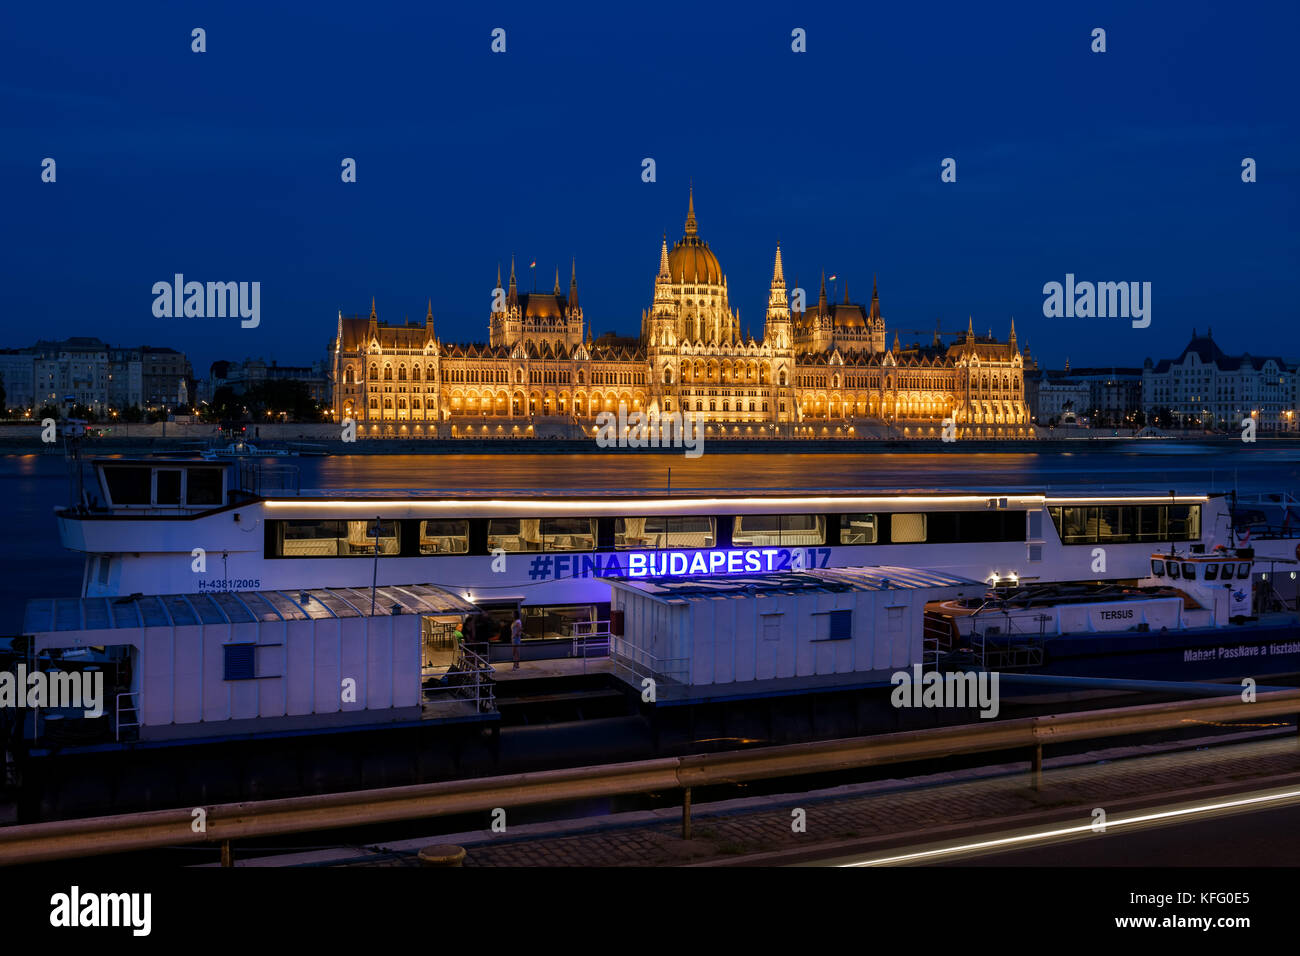 City of Budapest by night in Hungary, lighted Hungarian Parliament Building, boat ready for 17th FINA World Championships 2017 on Danube river Stock Photo